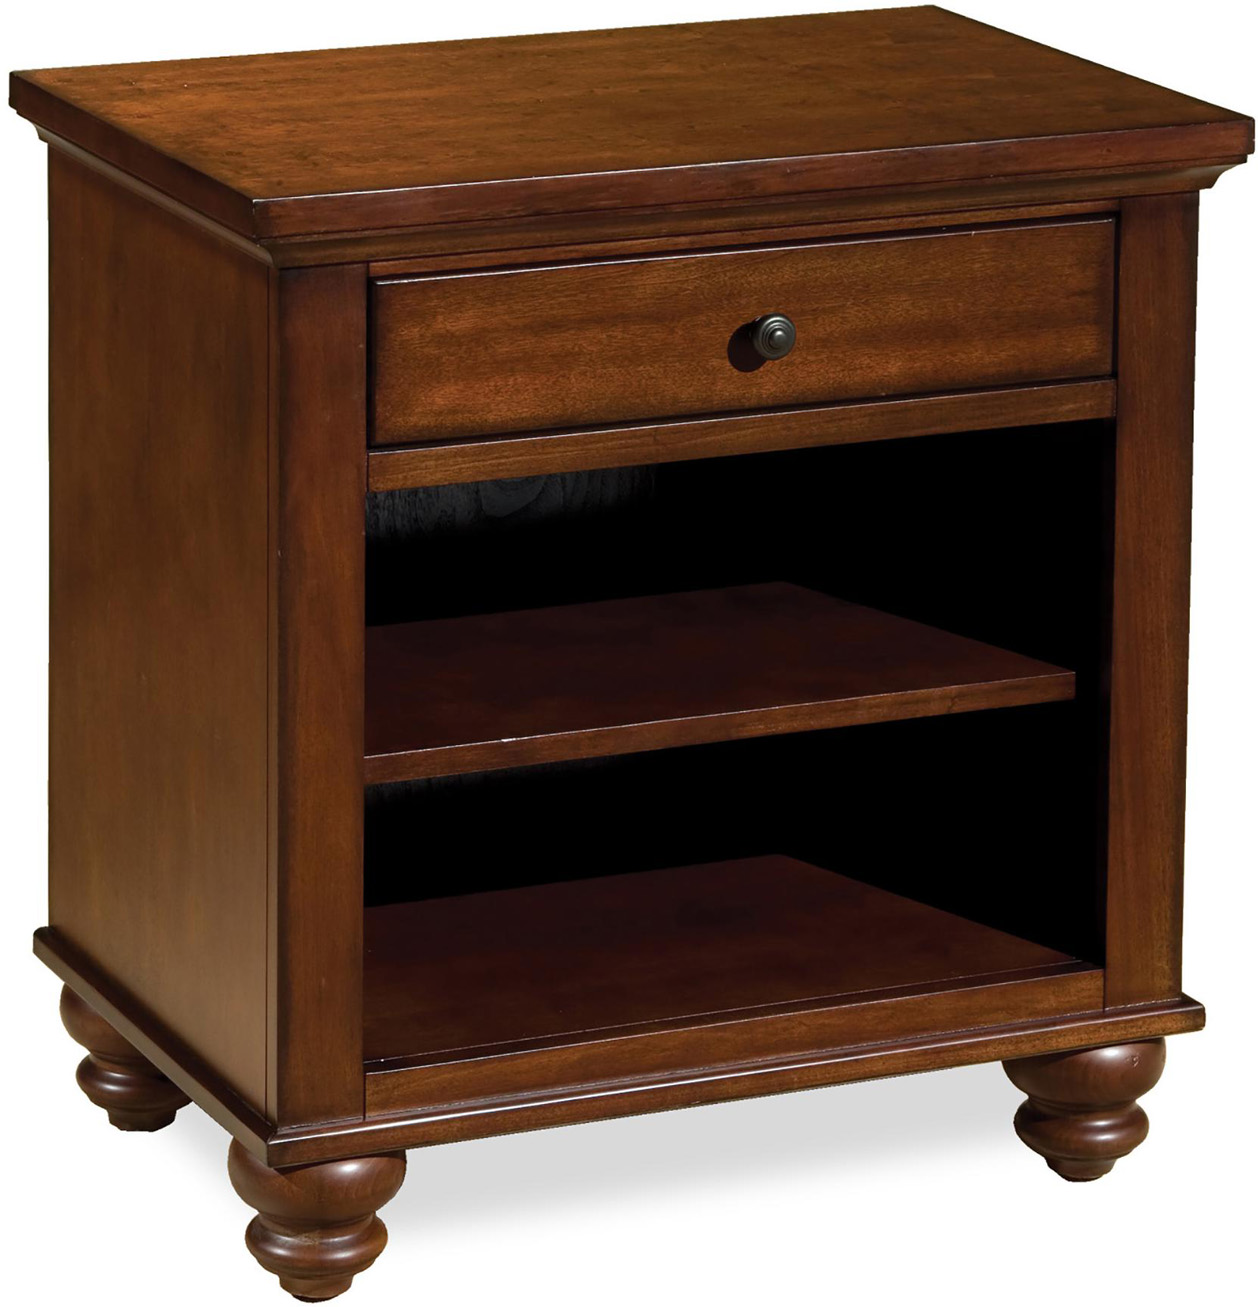 Cambridge 1 Drawer Nightstand in the Brown Cherry finish